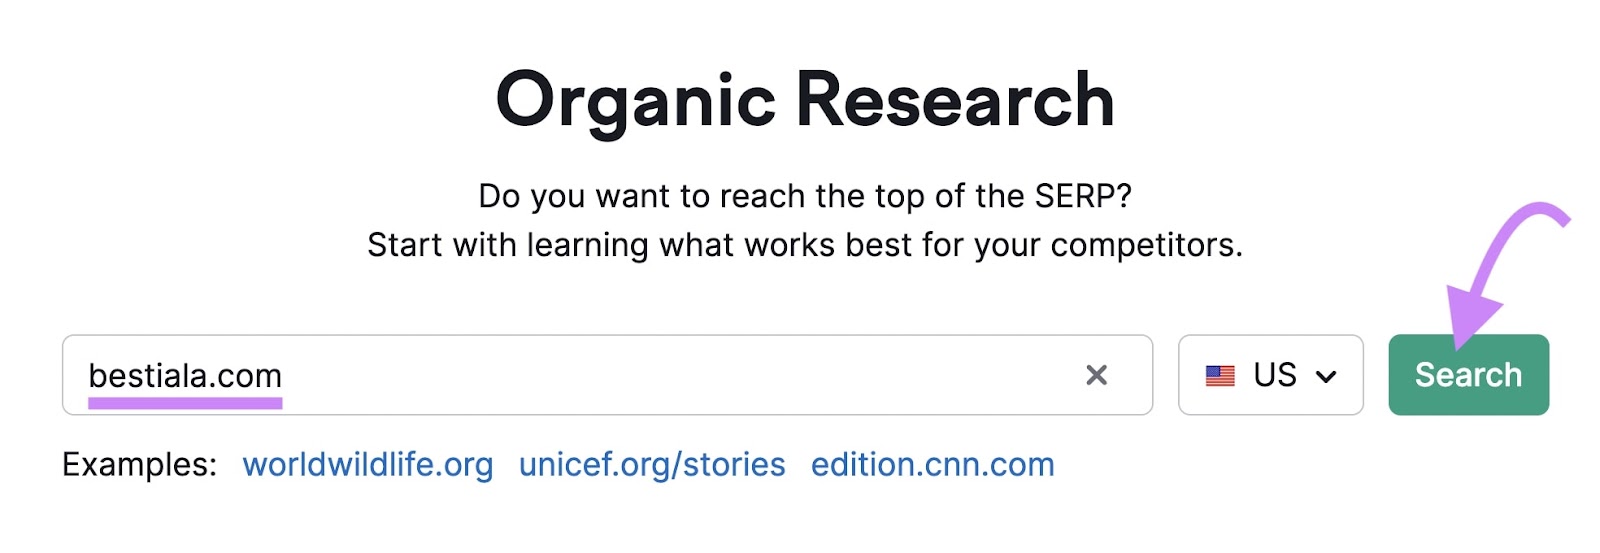 "bestiala.com" domain entered into the Organic Research tool search bar